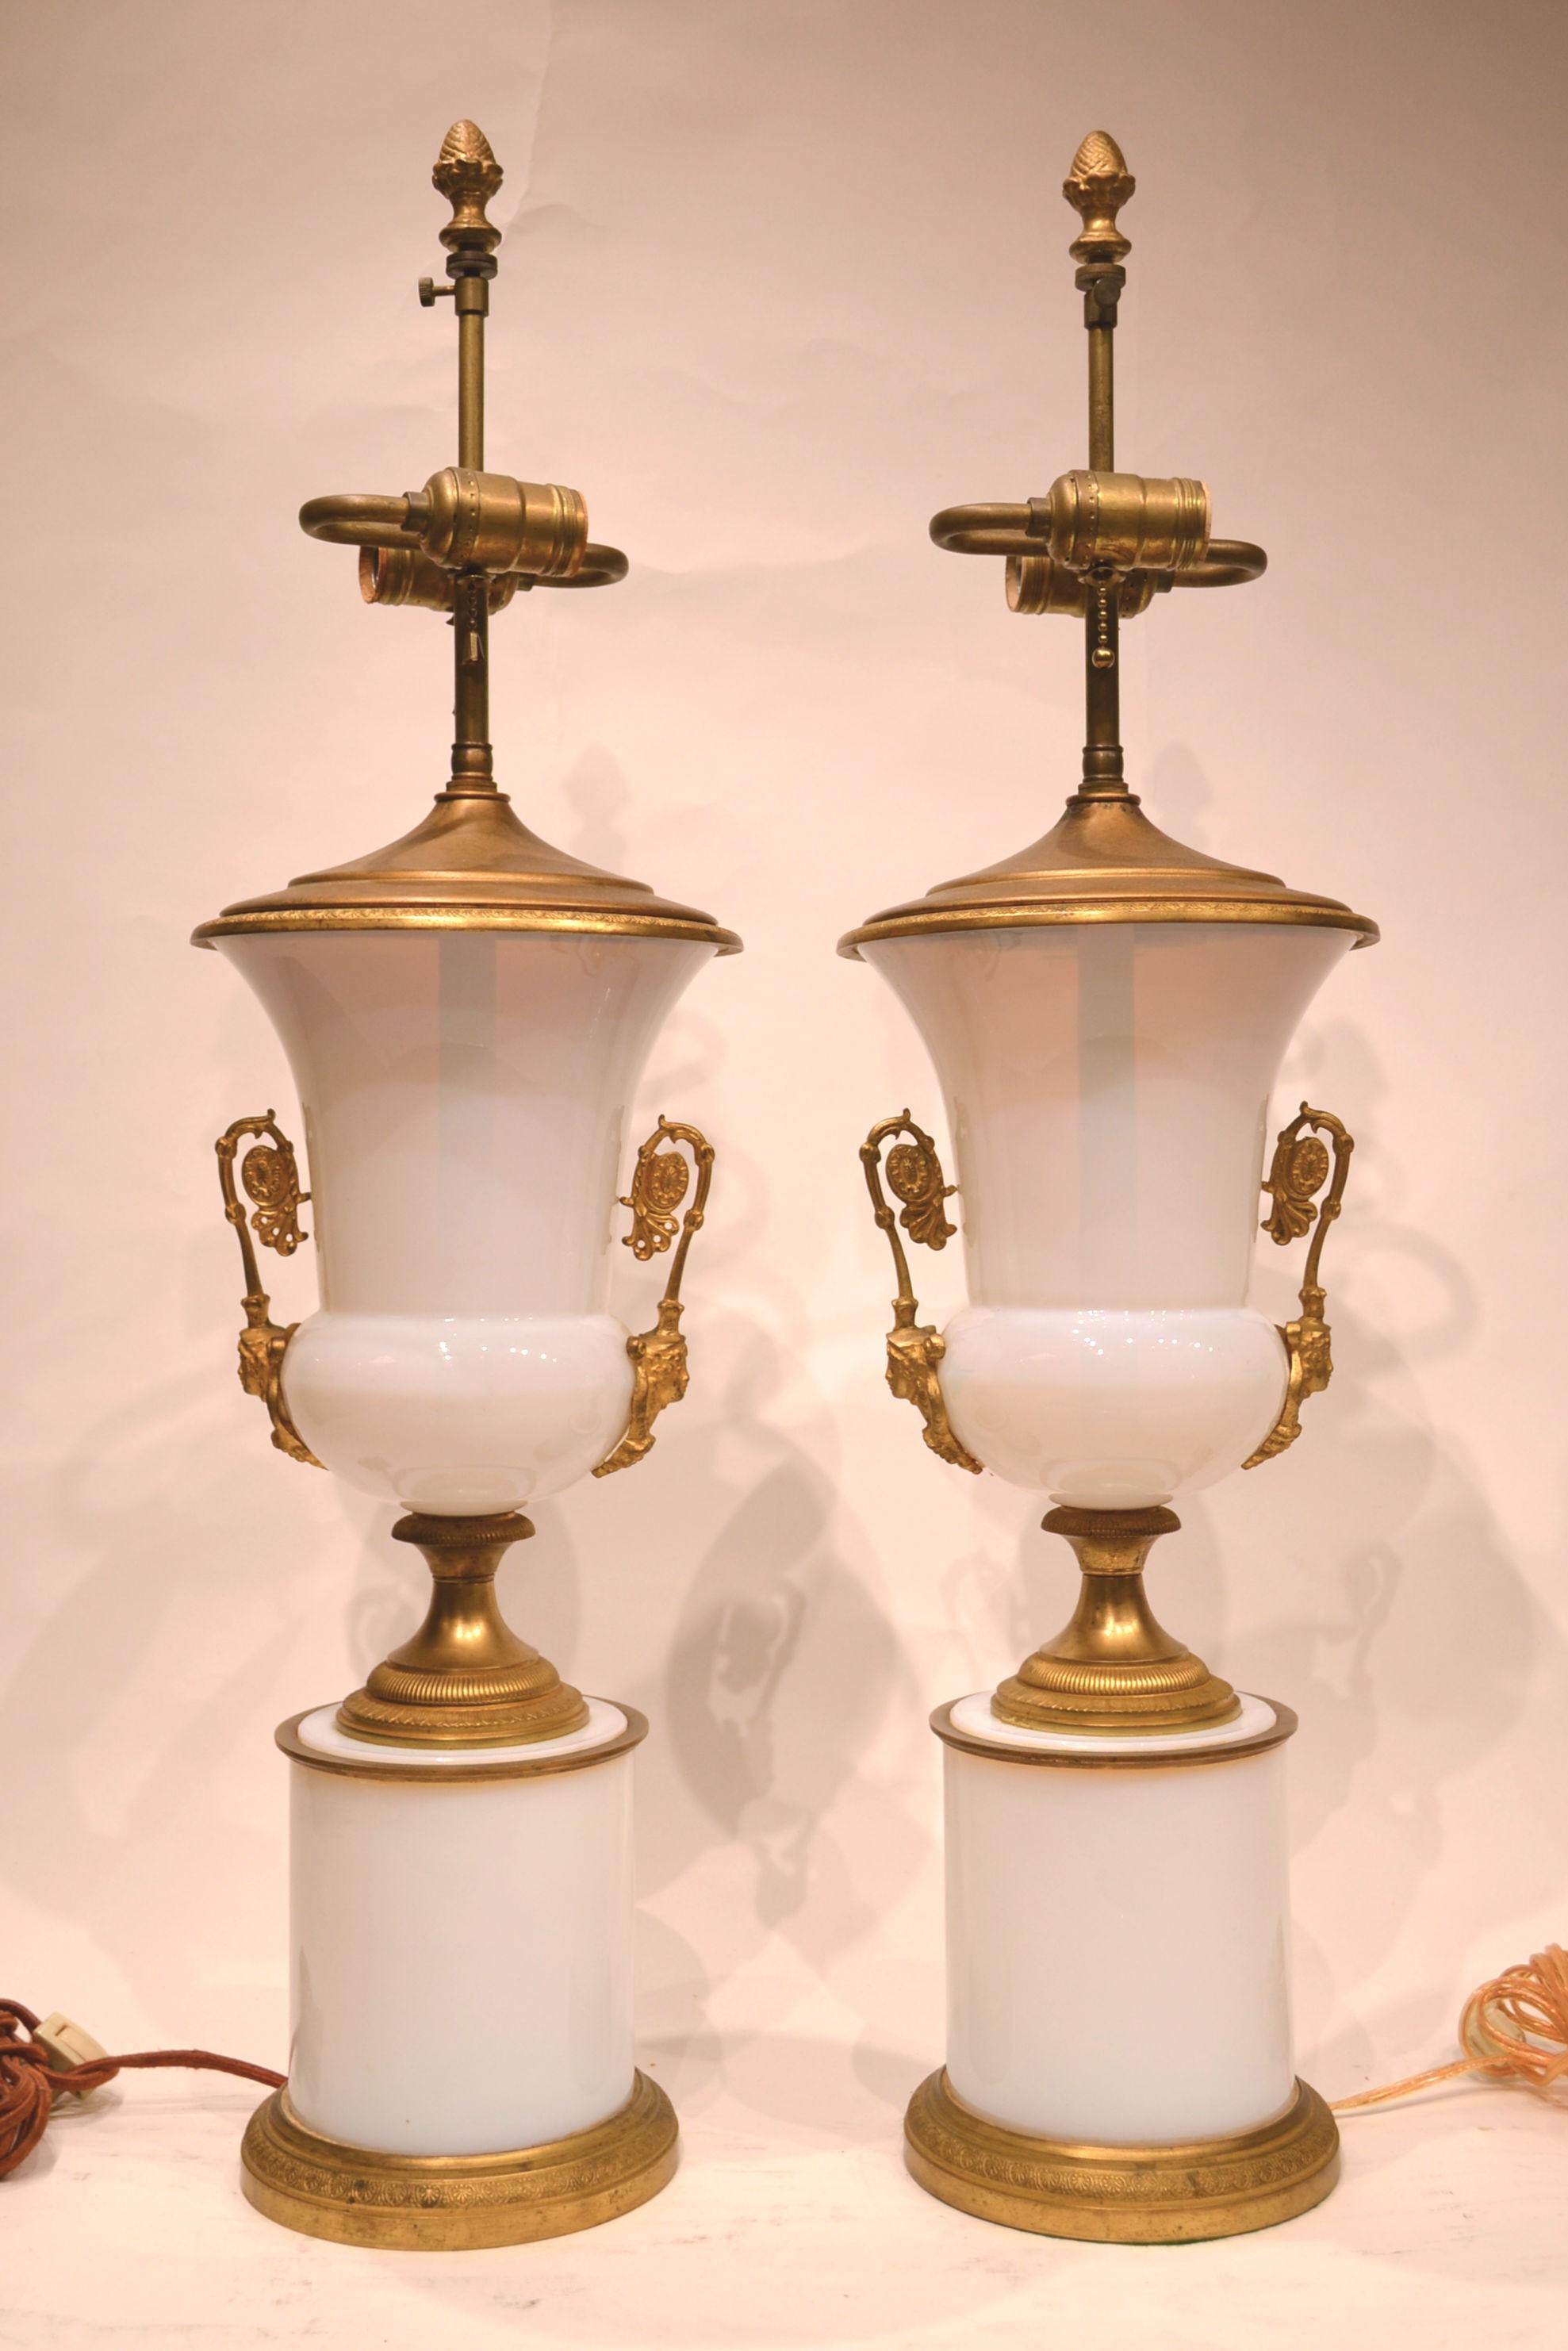 Pair of French Empire style gilt bronze mounted white opaline glass table lamps.